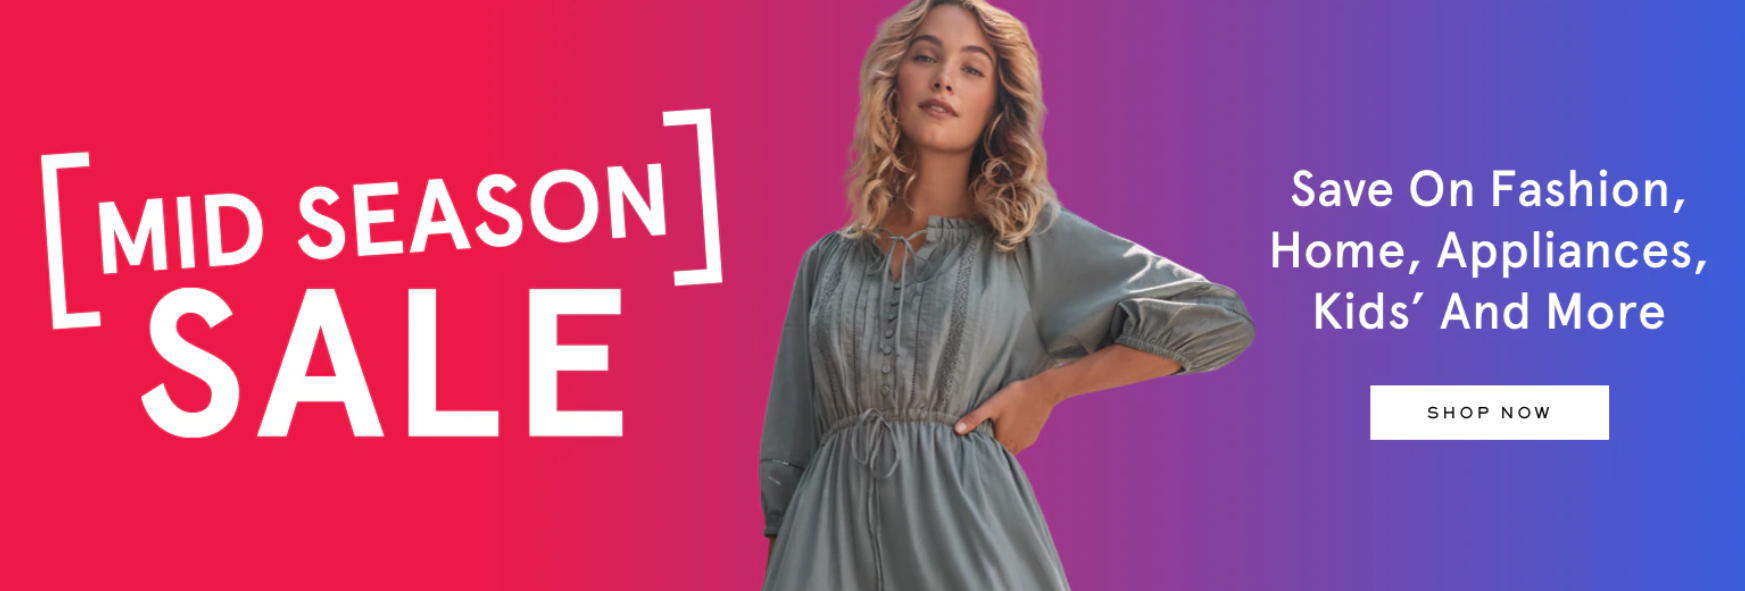 Myer Mid Season sale up to 50% OFF on fashion, home, appliances, kids items & more